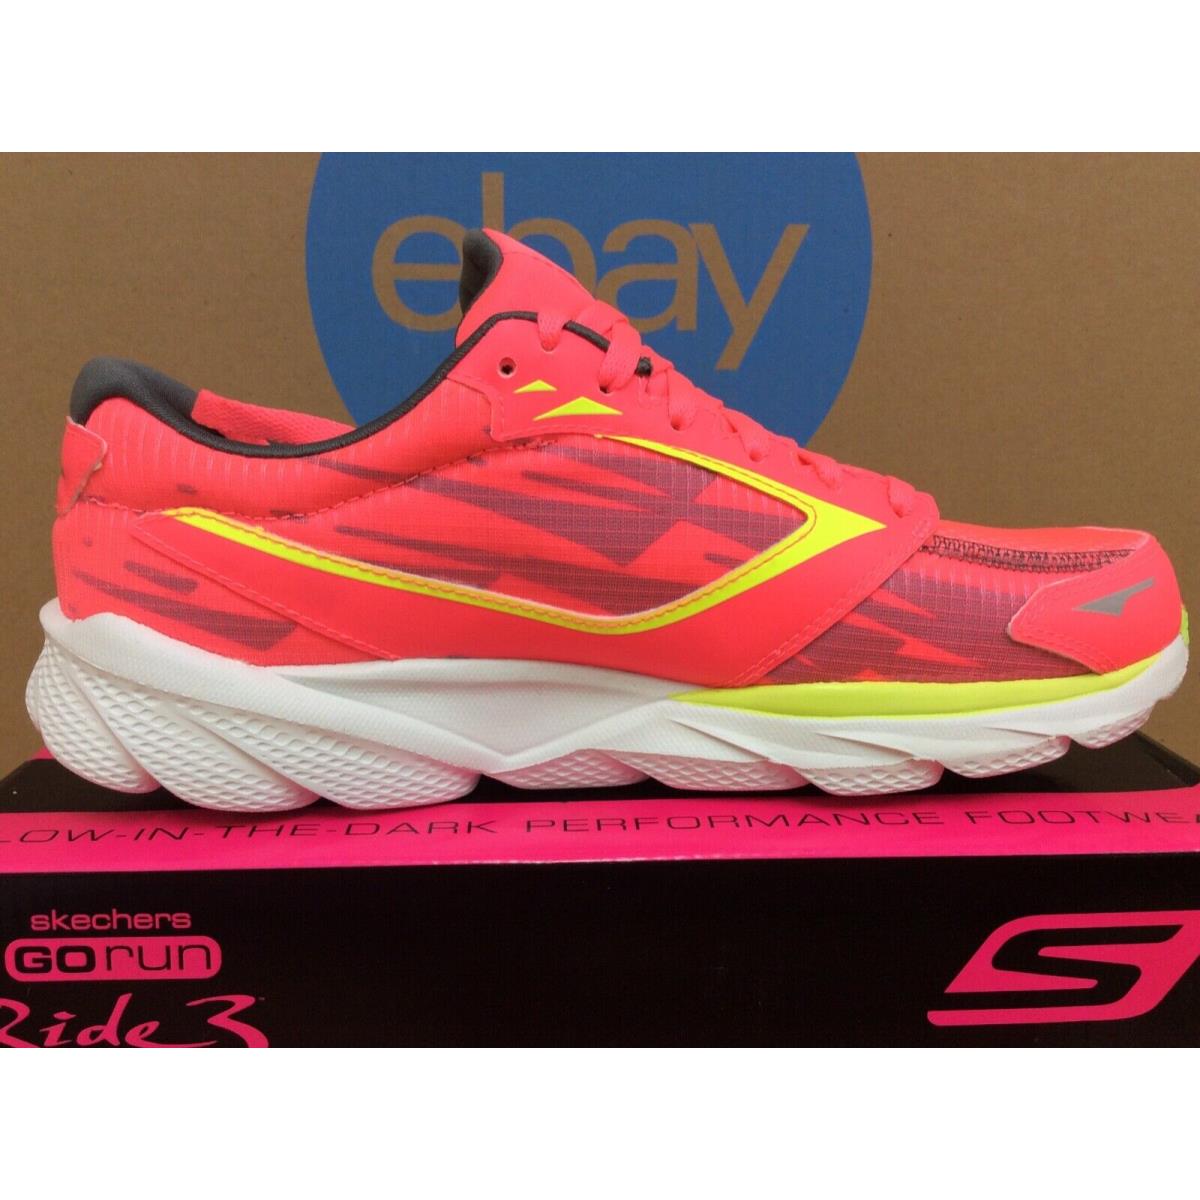 Skechers shoes  - Hot Pink Lime 8